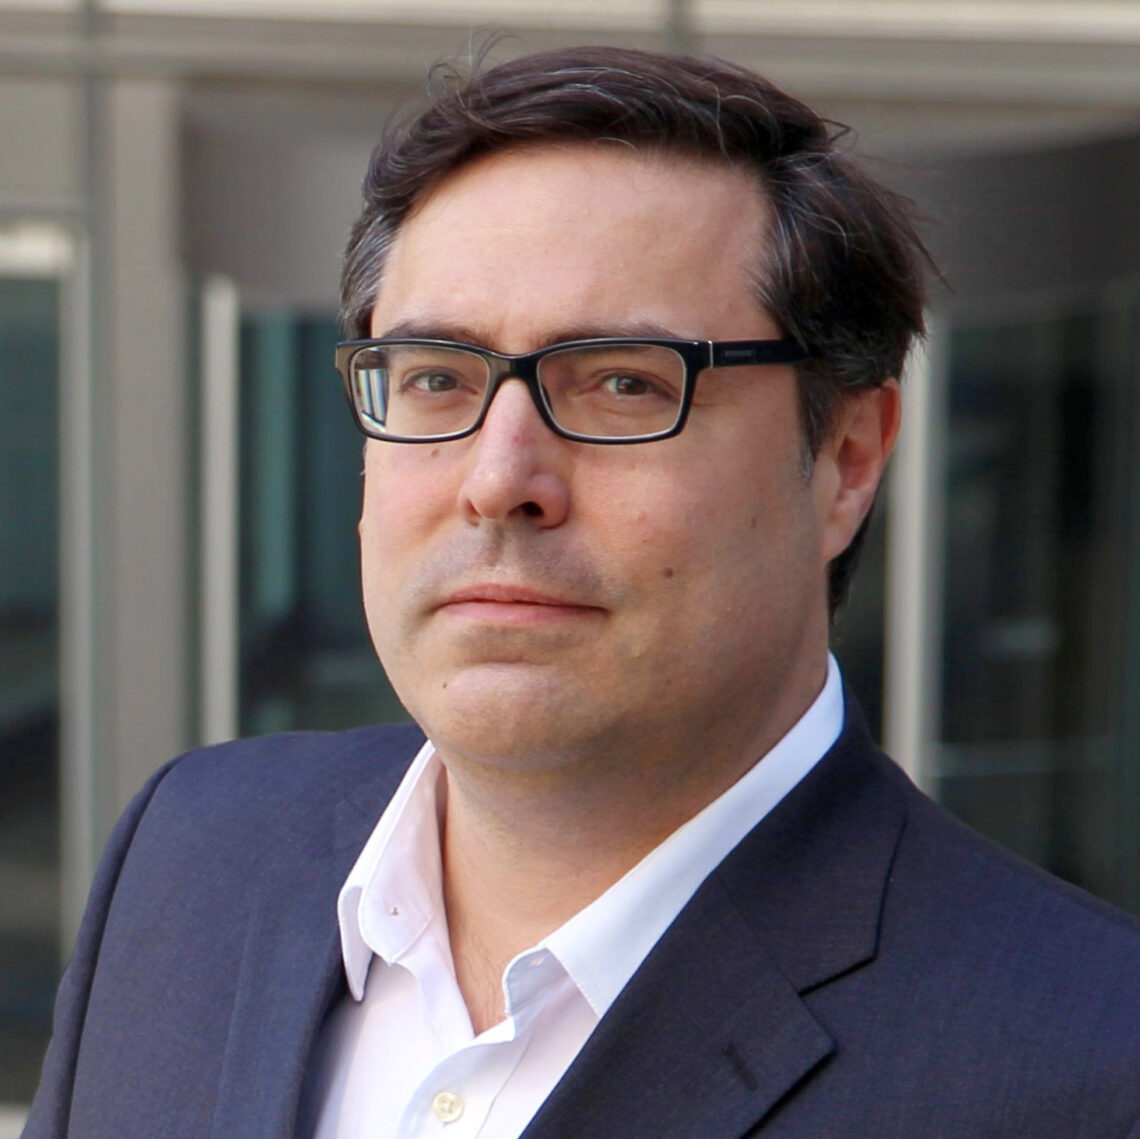 Man with dark hair and glasses in a suit